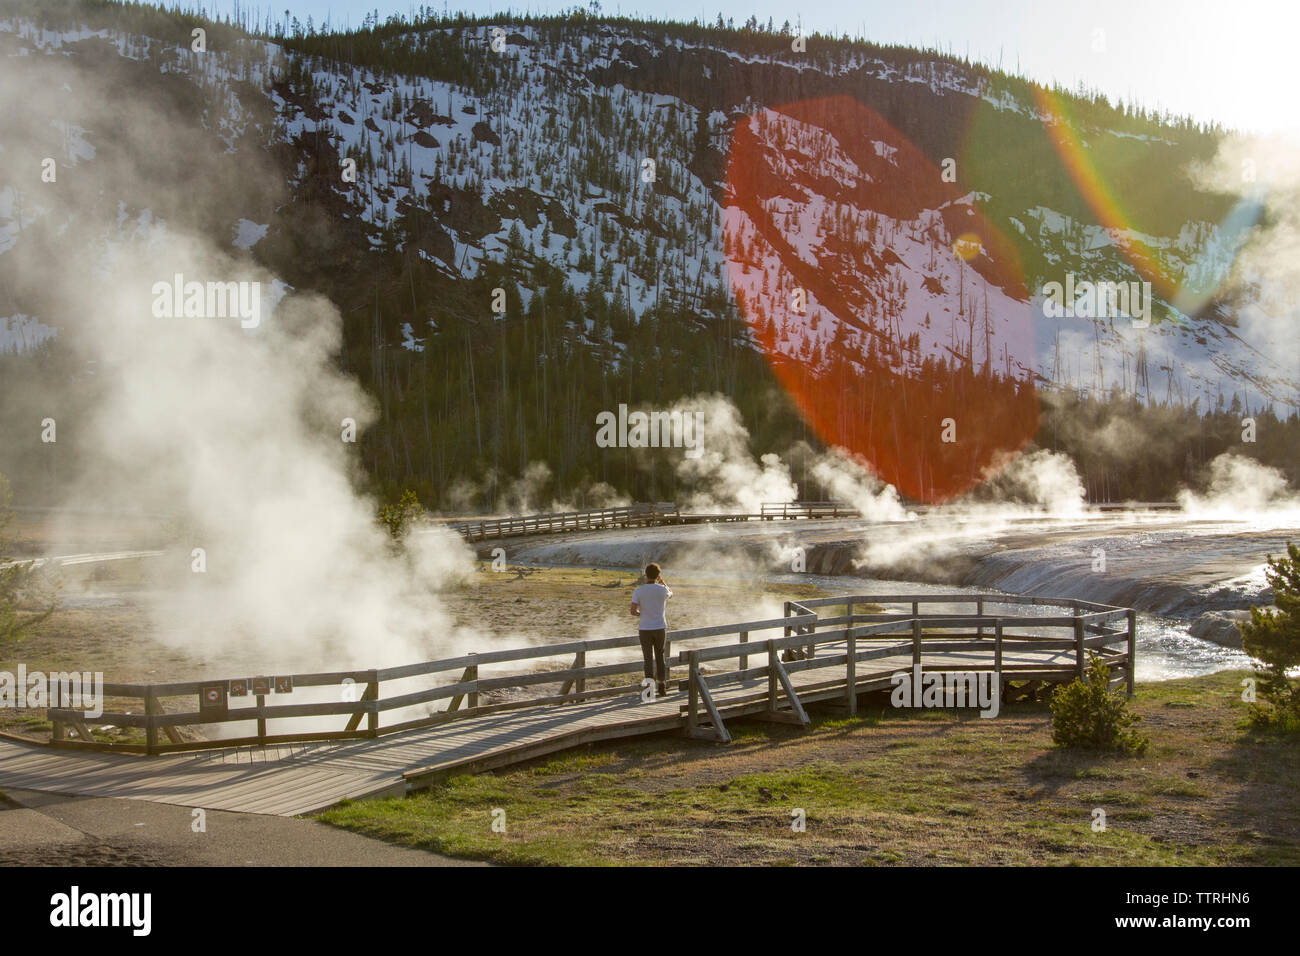 Mid distance of hiker looking at steam coming out from hot spring at Yellowstone National Park Stock Photo